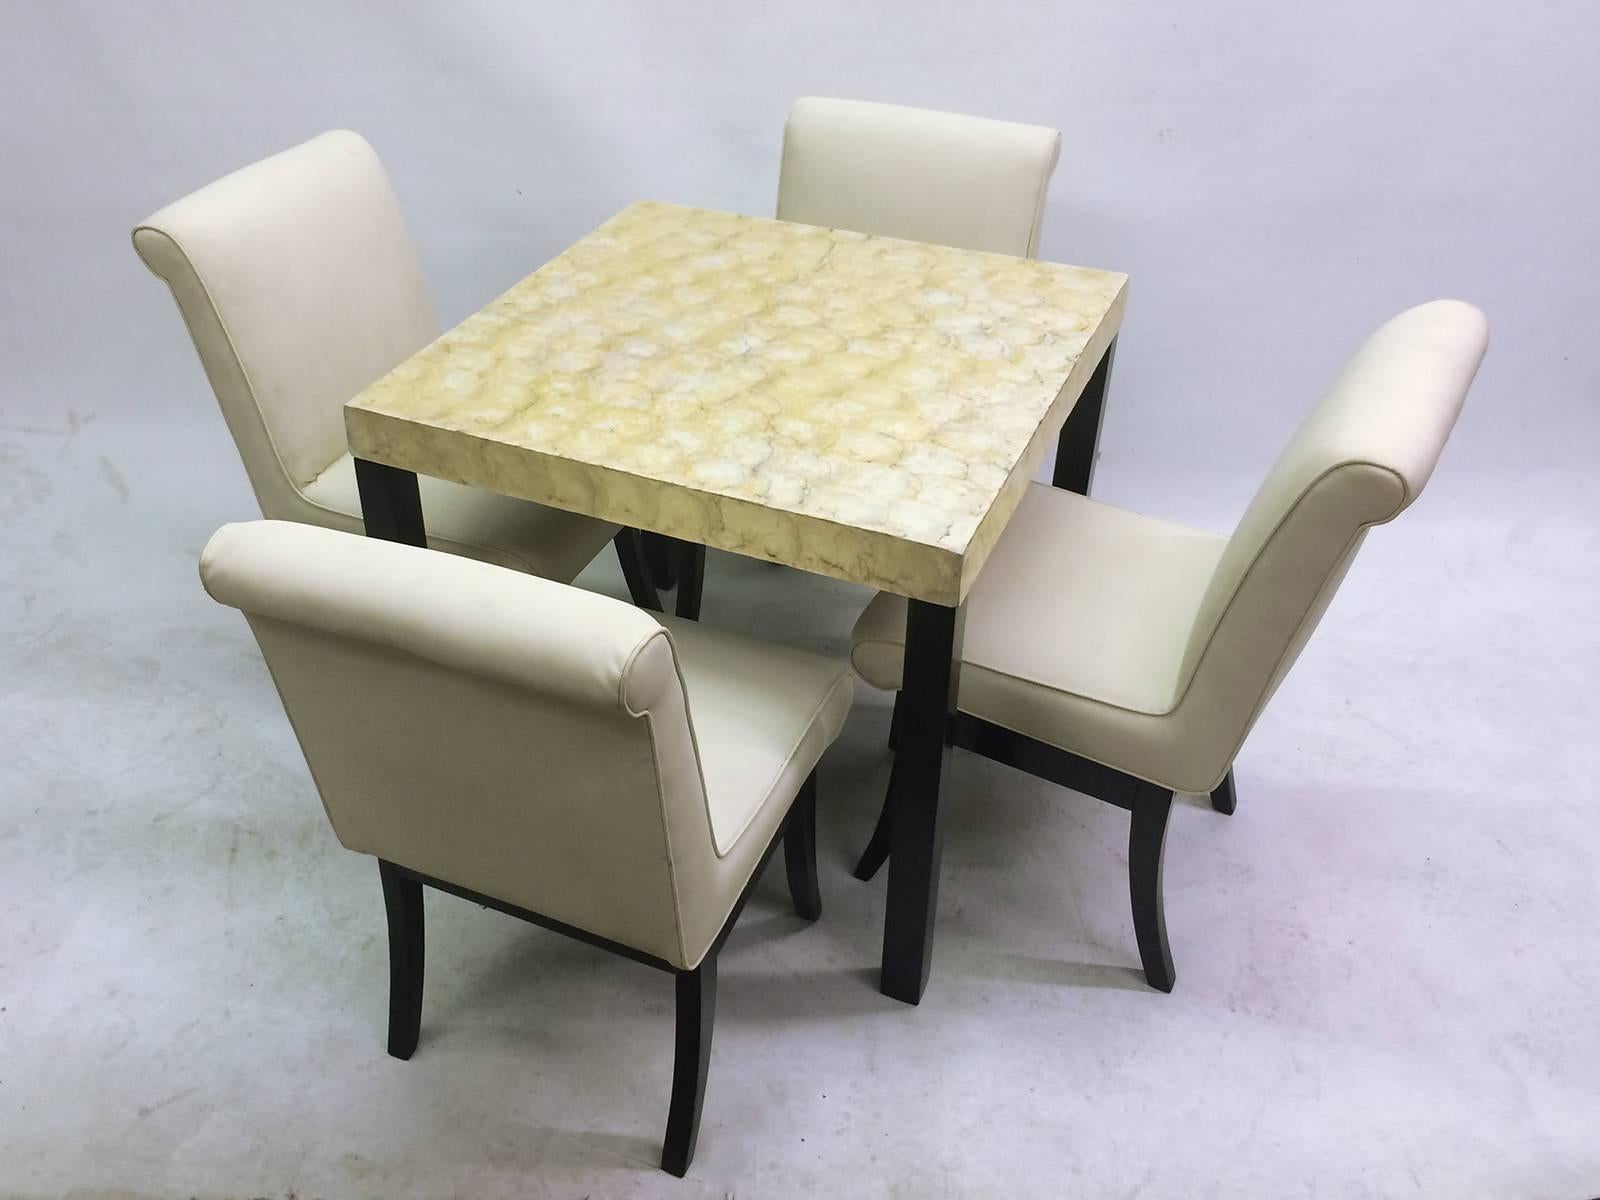 This is a five-piece dining set with an abalone surfaced table, original off-white Naugahyde chair coverings and black lacquer legs. Measurements below are for the chairs. Measures: The table is 32